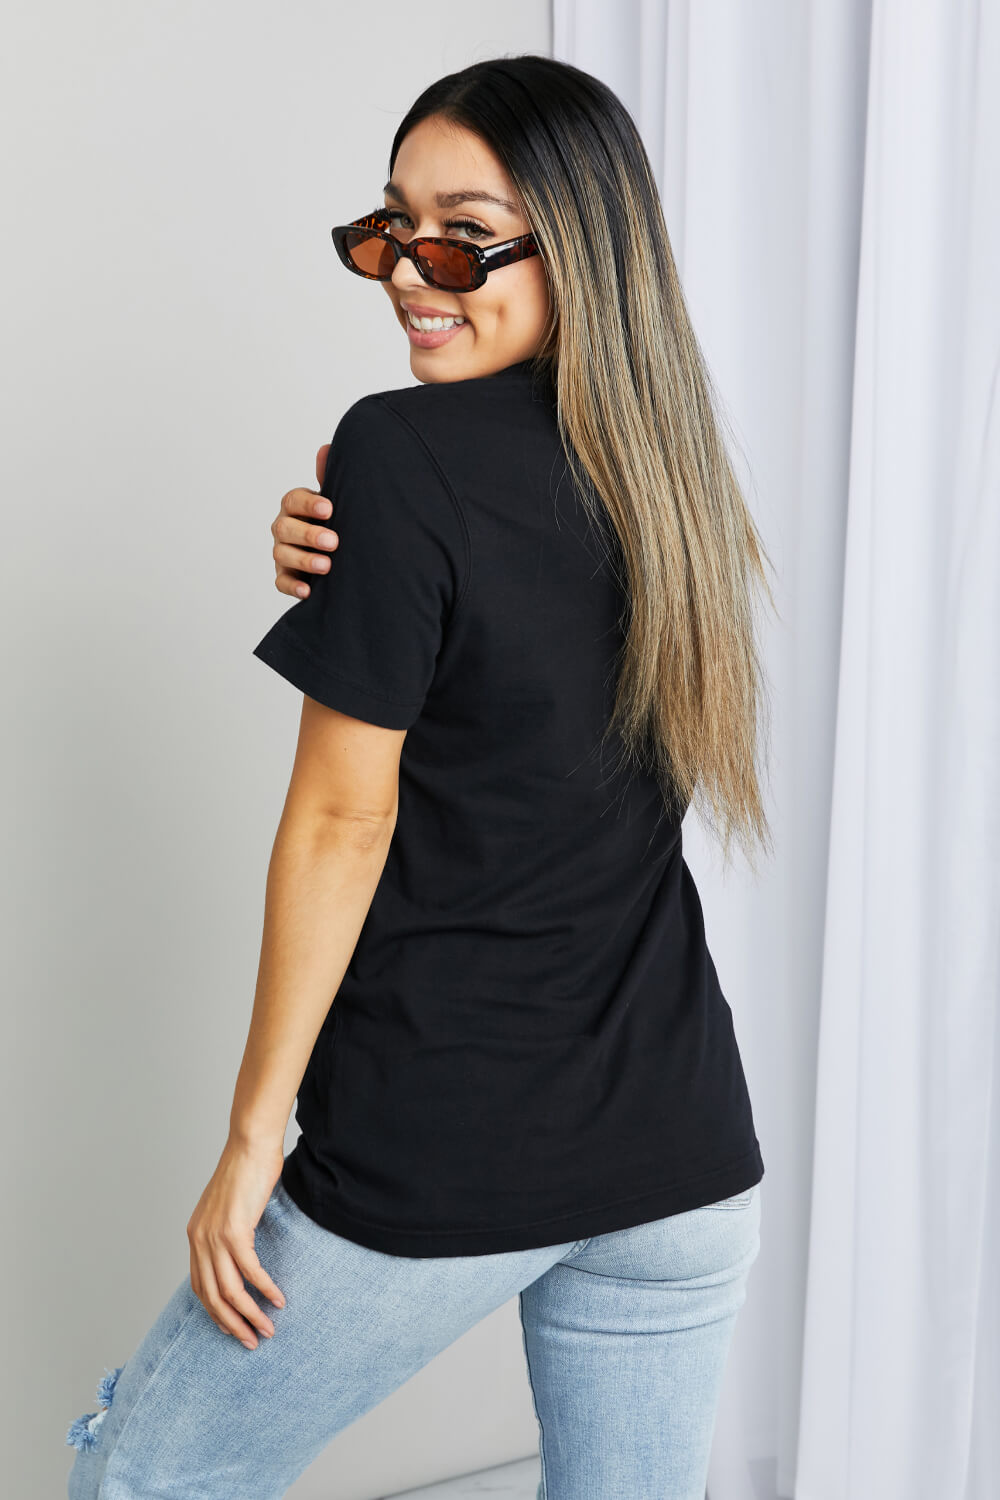 Woman modeling black tee with graphic print with white ink print - "Desert Dreamer"